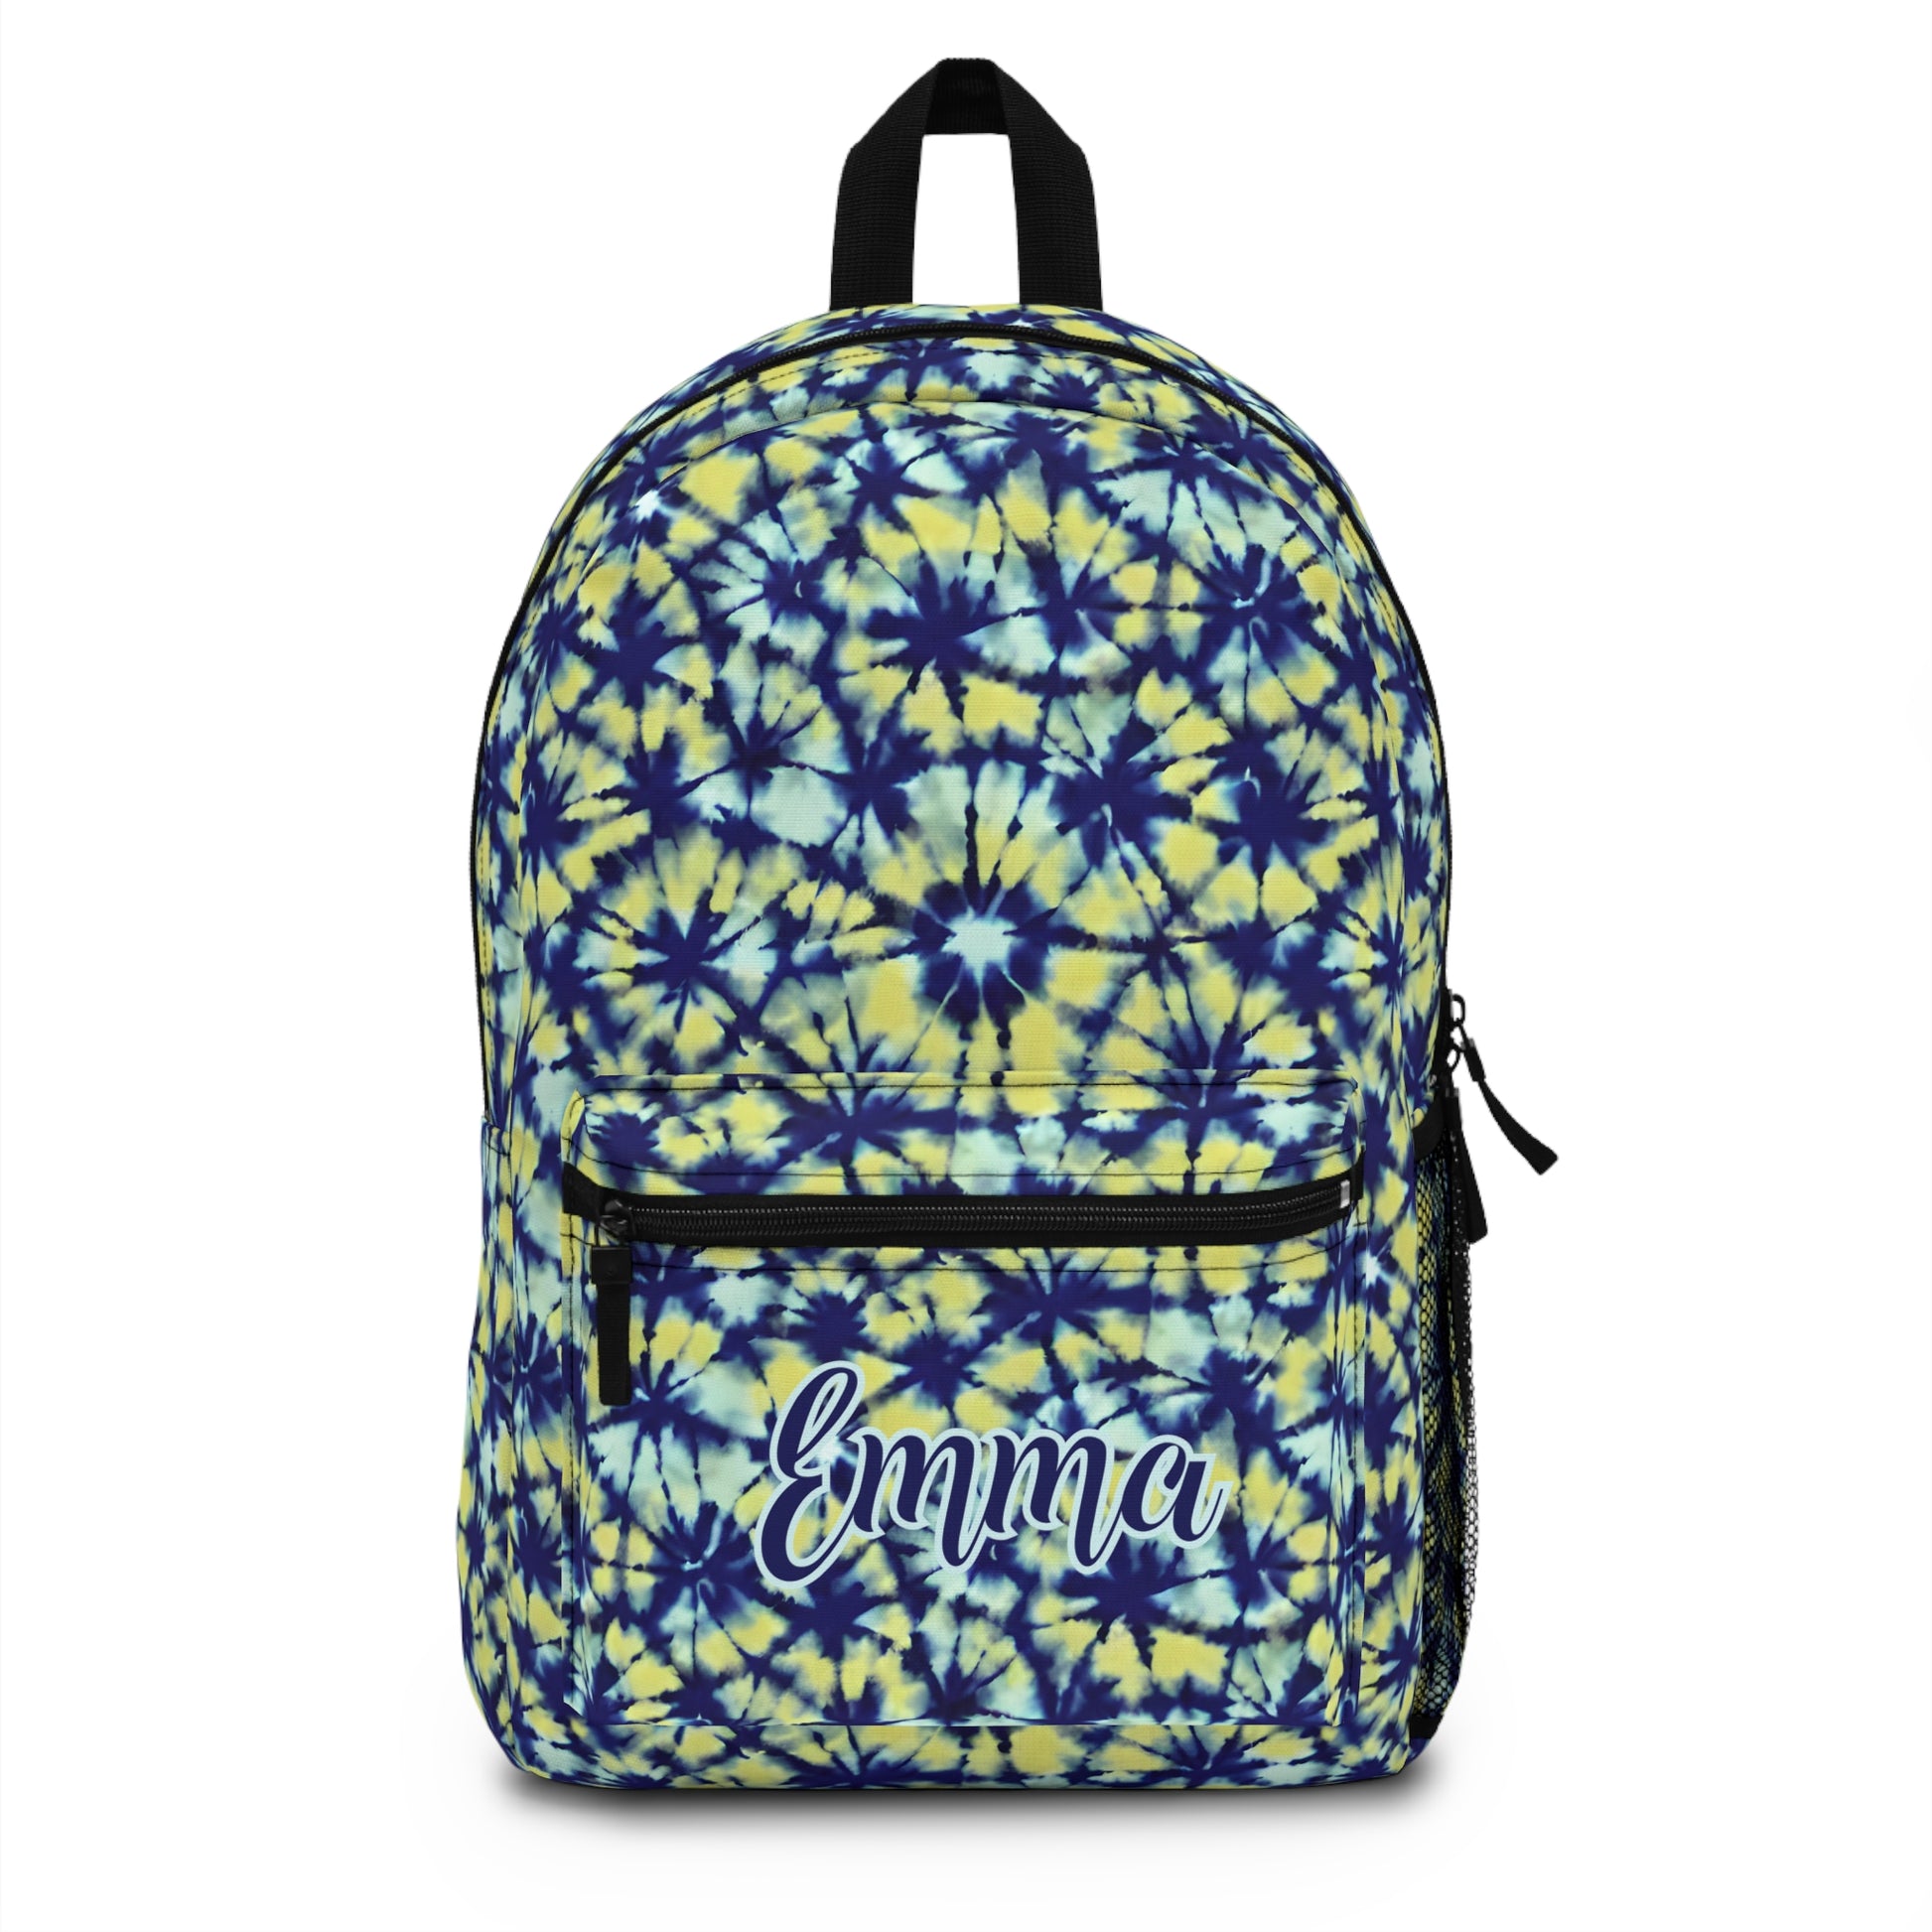 personalized girls tie dye backpack in navy blue and yellow colors